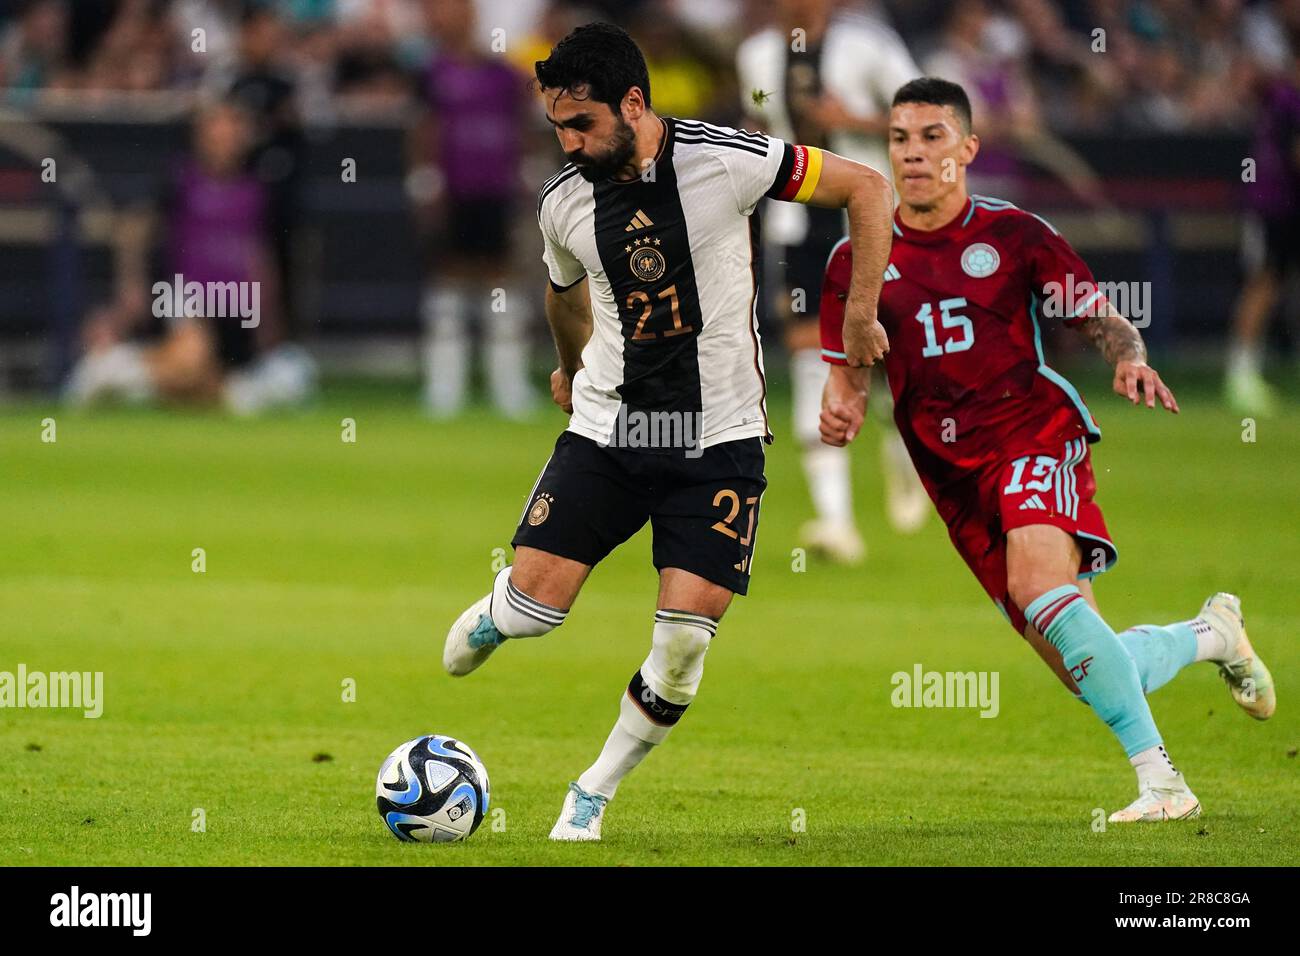 Gelsenkirchen, Germany. 20th June, 2023. GELSENKIRCHEN, GERMANY - JUNE 20: Ilkay Gundogan of Germany battle for possession with Mateus Uribe of Colombia during the International Friendly match between Germany and Colombia at the Veltins-Arena on June 20, 2023 in Gelsenkirchen, Germany (Photo by Joris Verwijst/Orange Pictures) Credit: Orange Pics BV/Alamy Live News Stock Photo